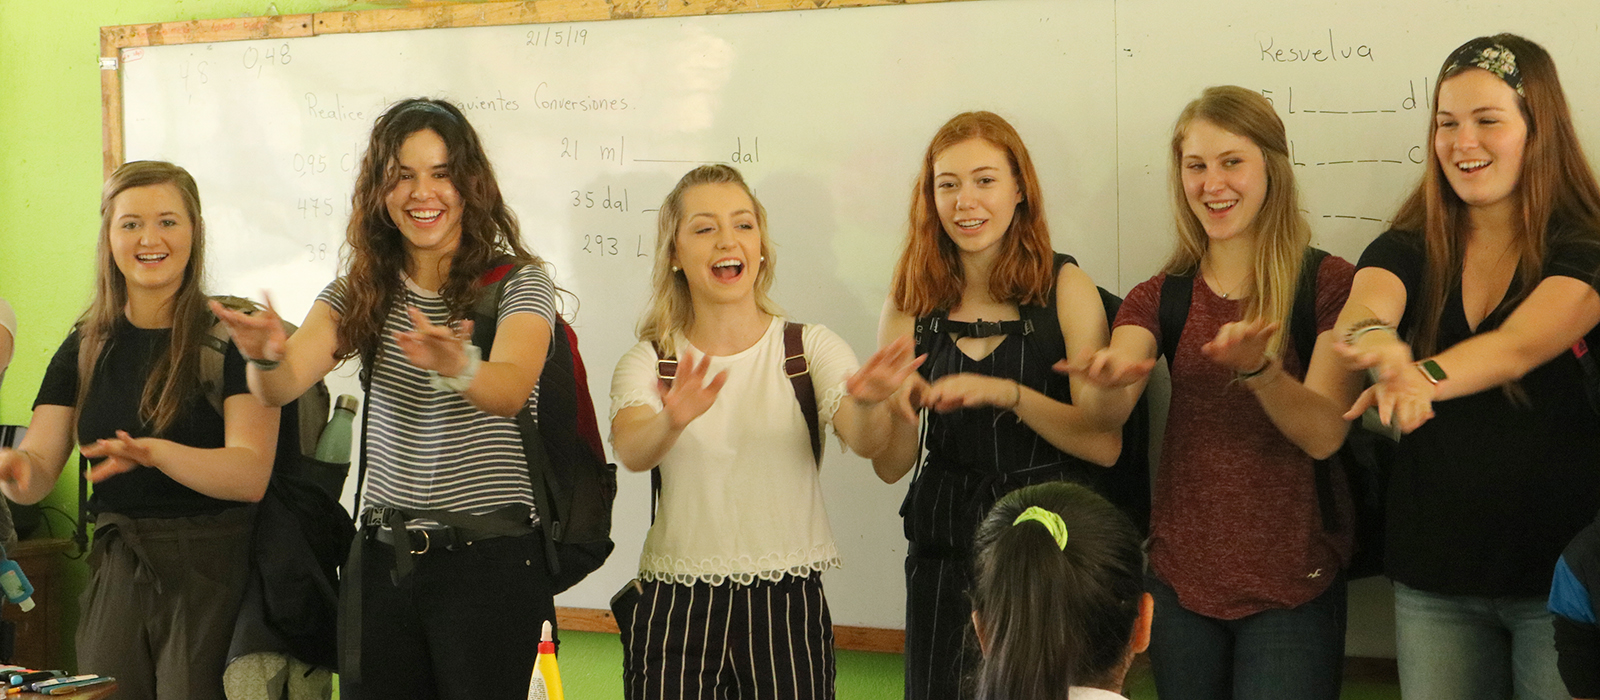 Husker students perform a song at a classroom in Costa Rica